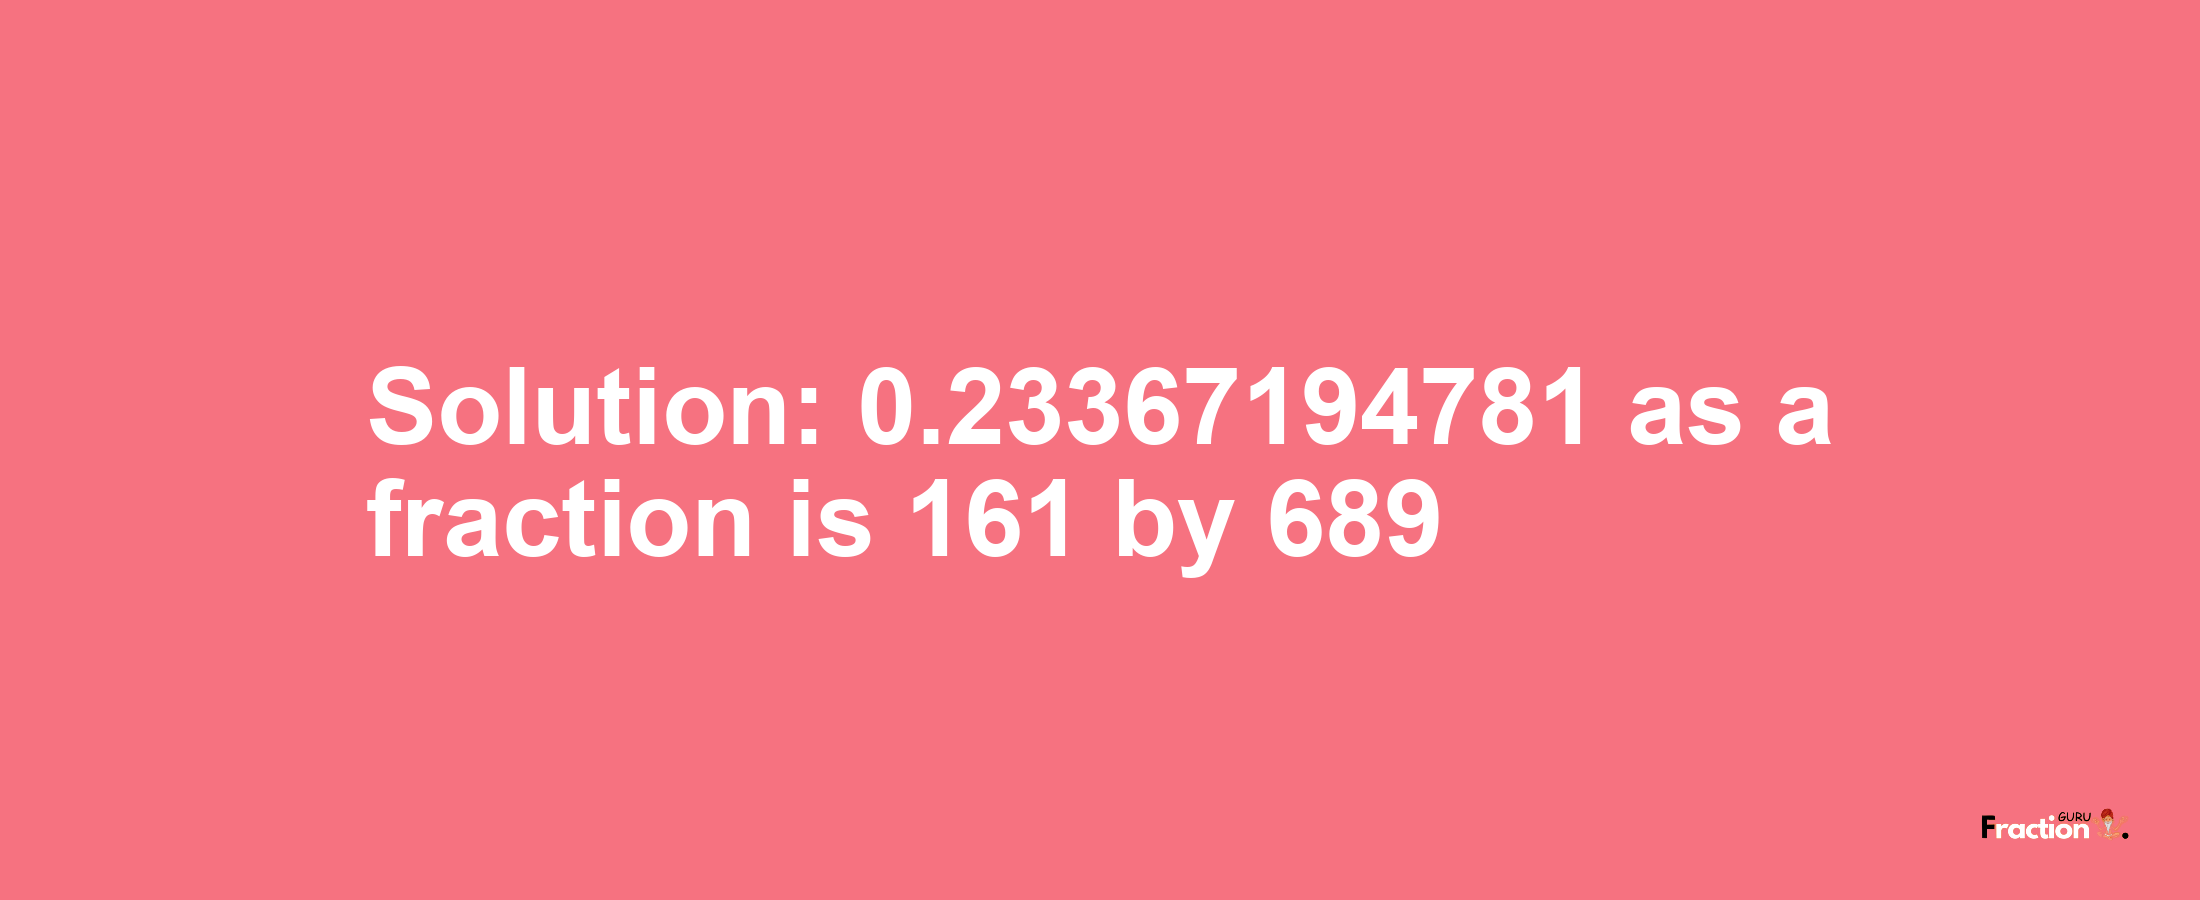 Solution:0.23367194781 as a fraction is 161/689